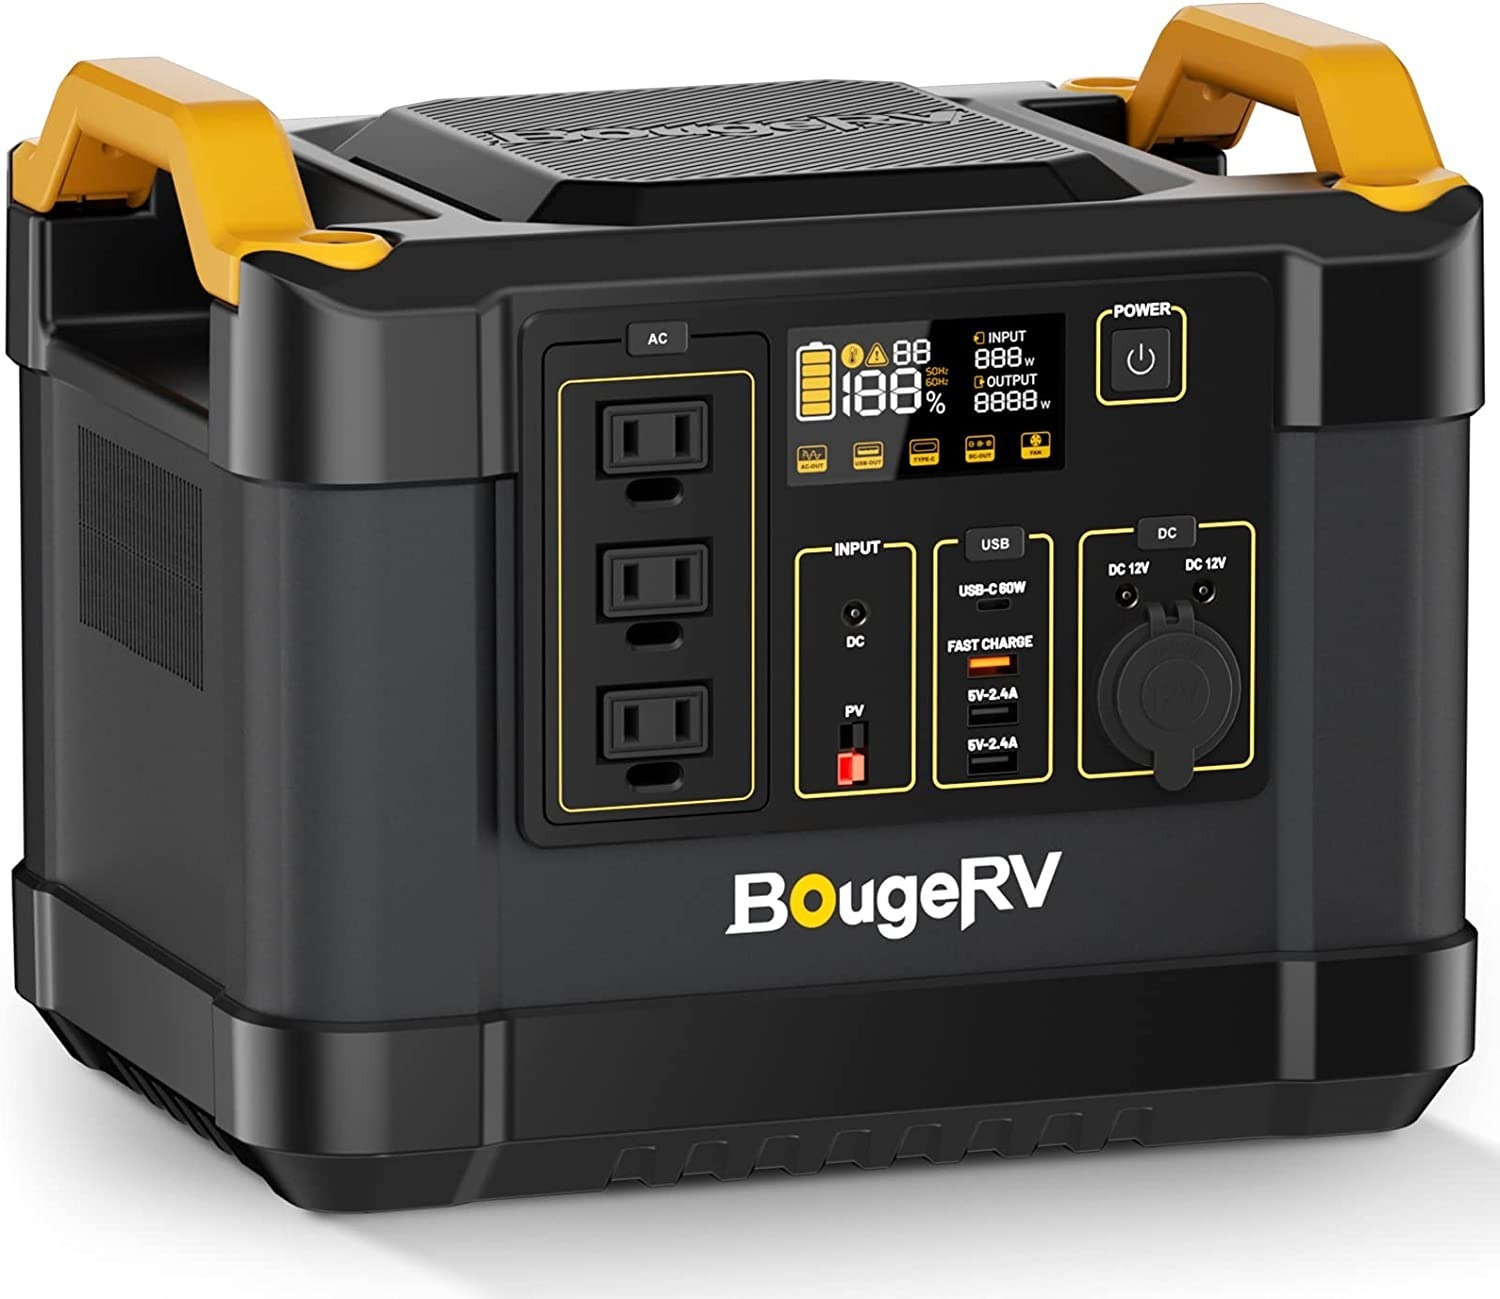 1100Wh (1200W) BougeRV Portable Lithium-ion Power Station $540 + Free Shipping